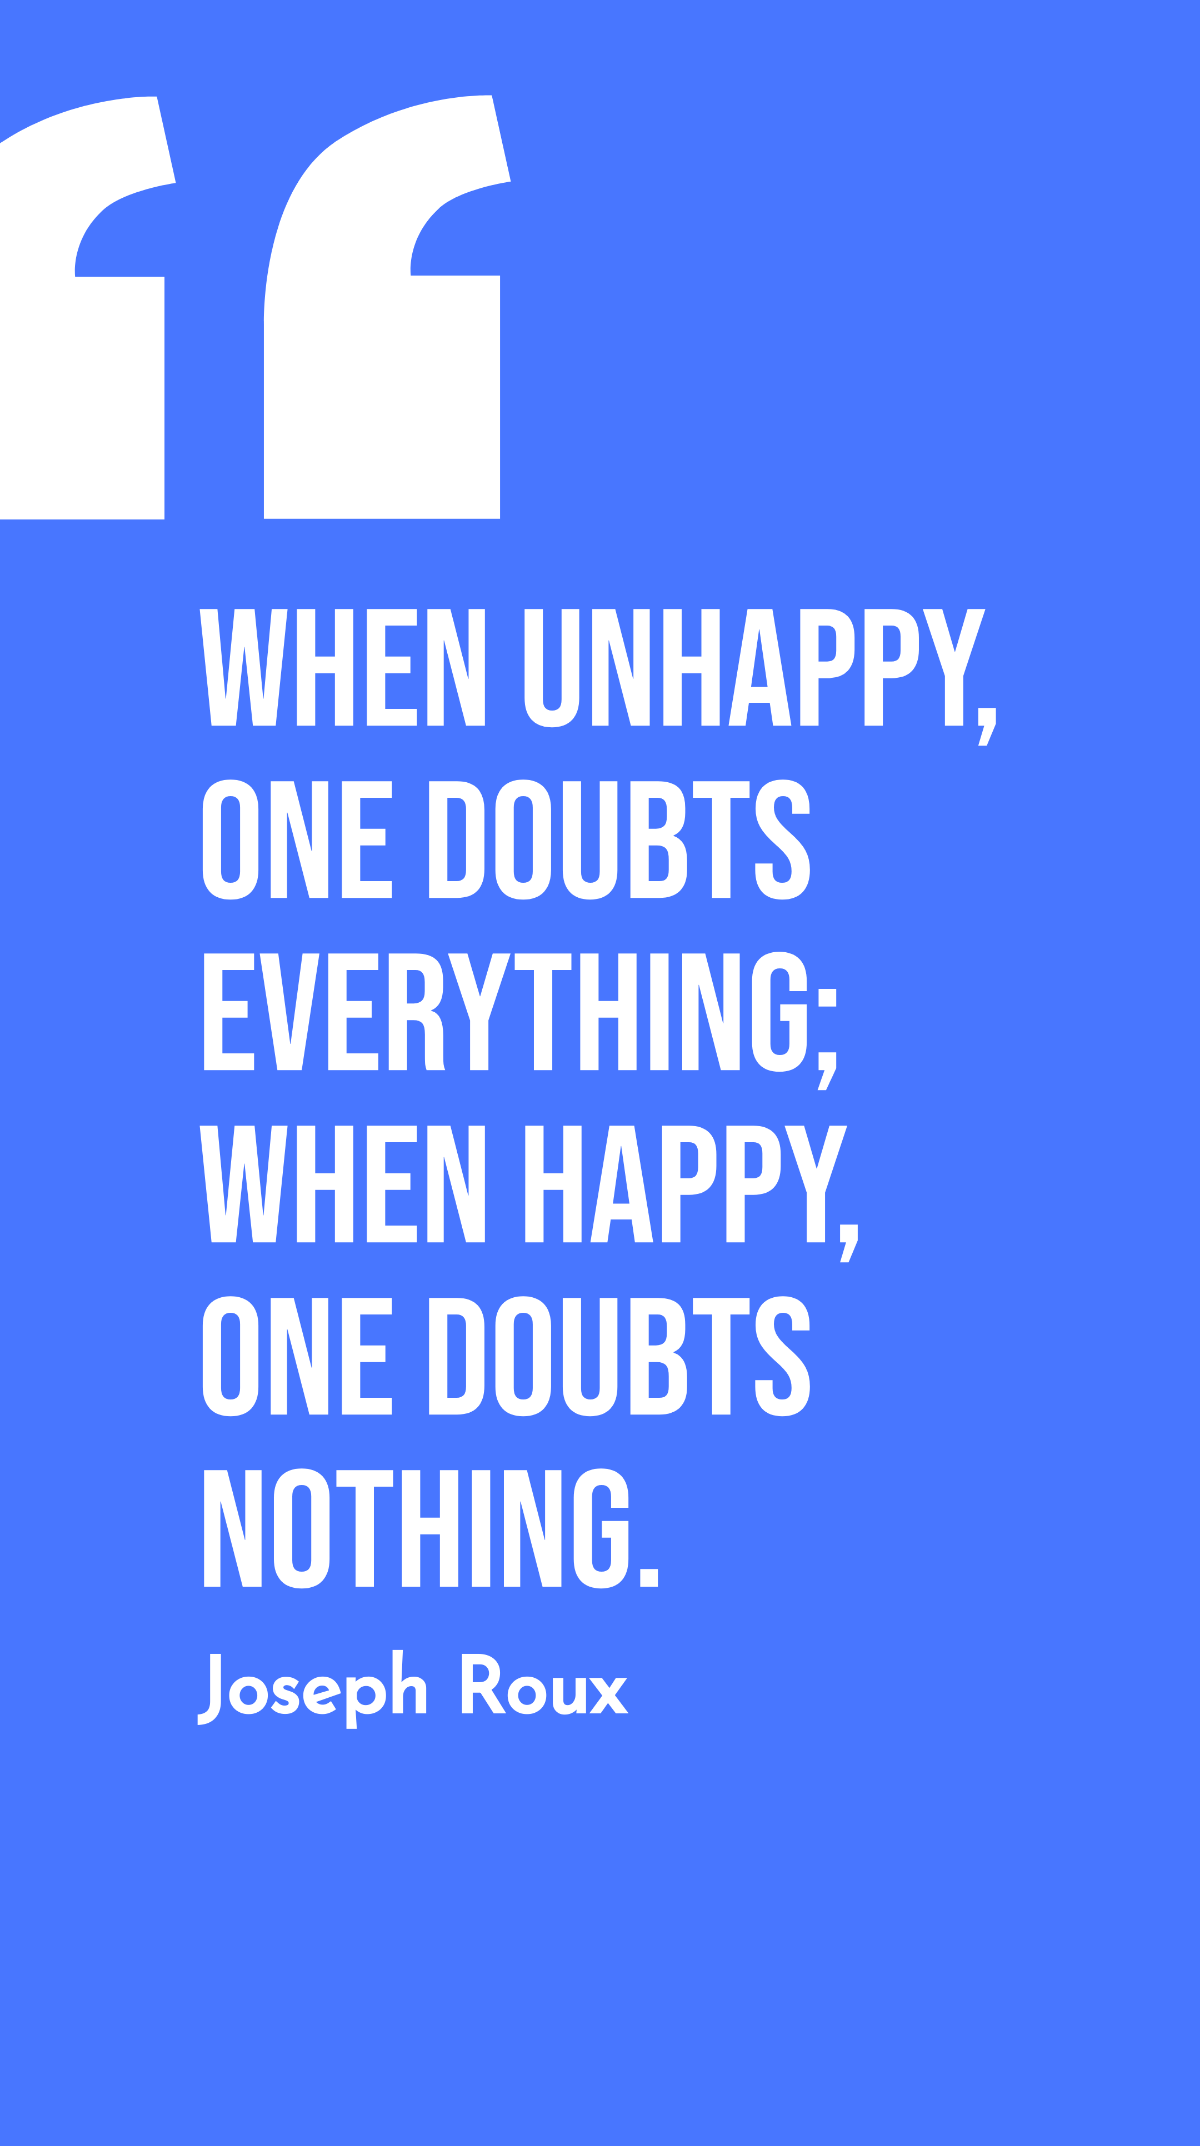 Joseph Roux - When unhappy, one doubts everything; when happy, one doubts nothing. Template